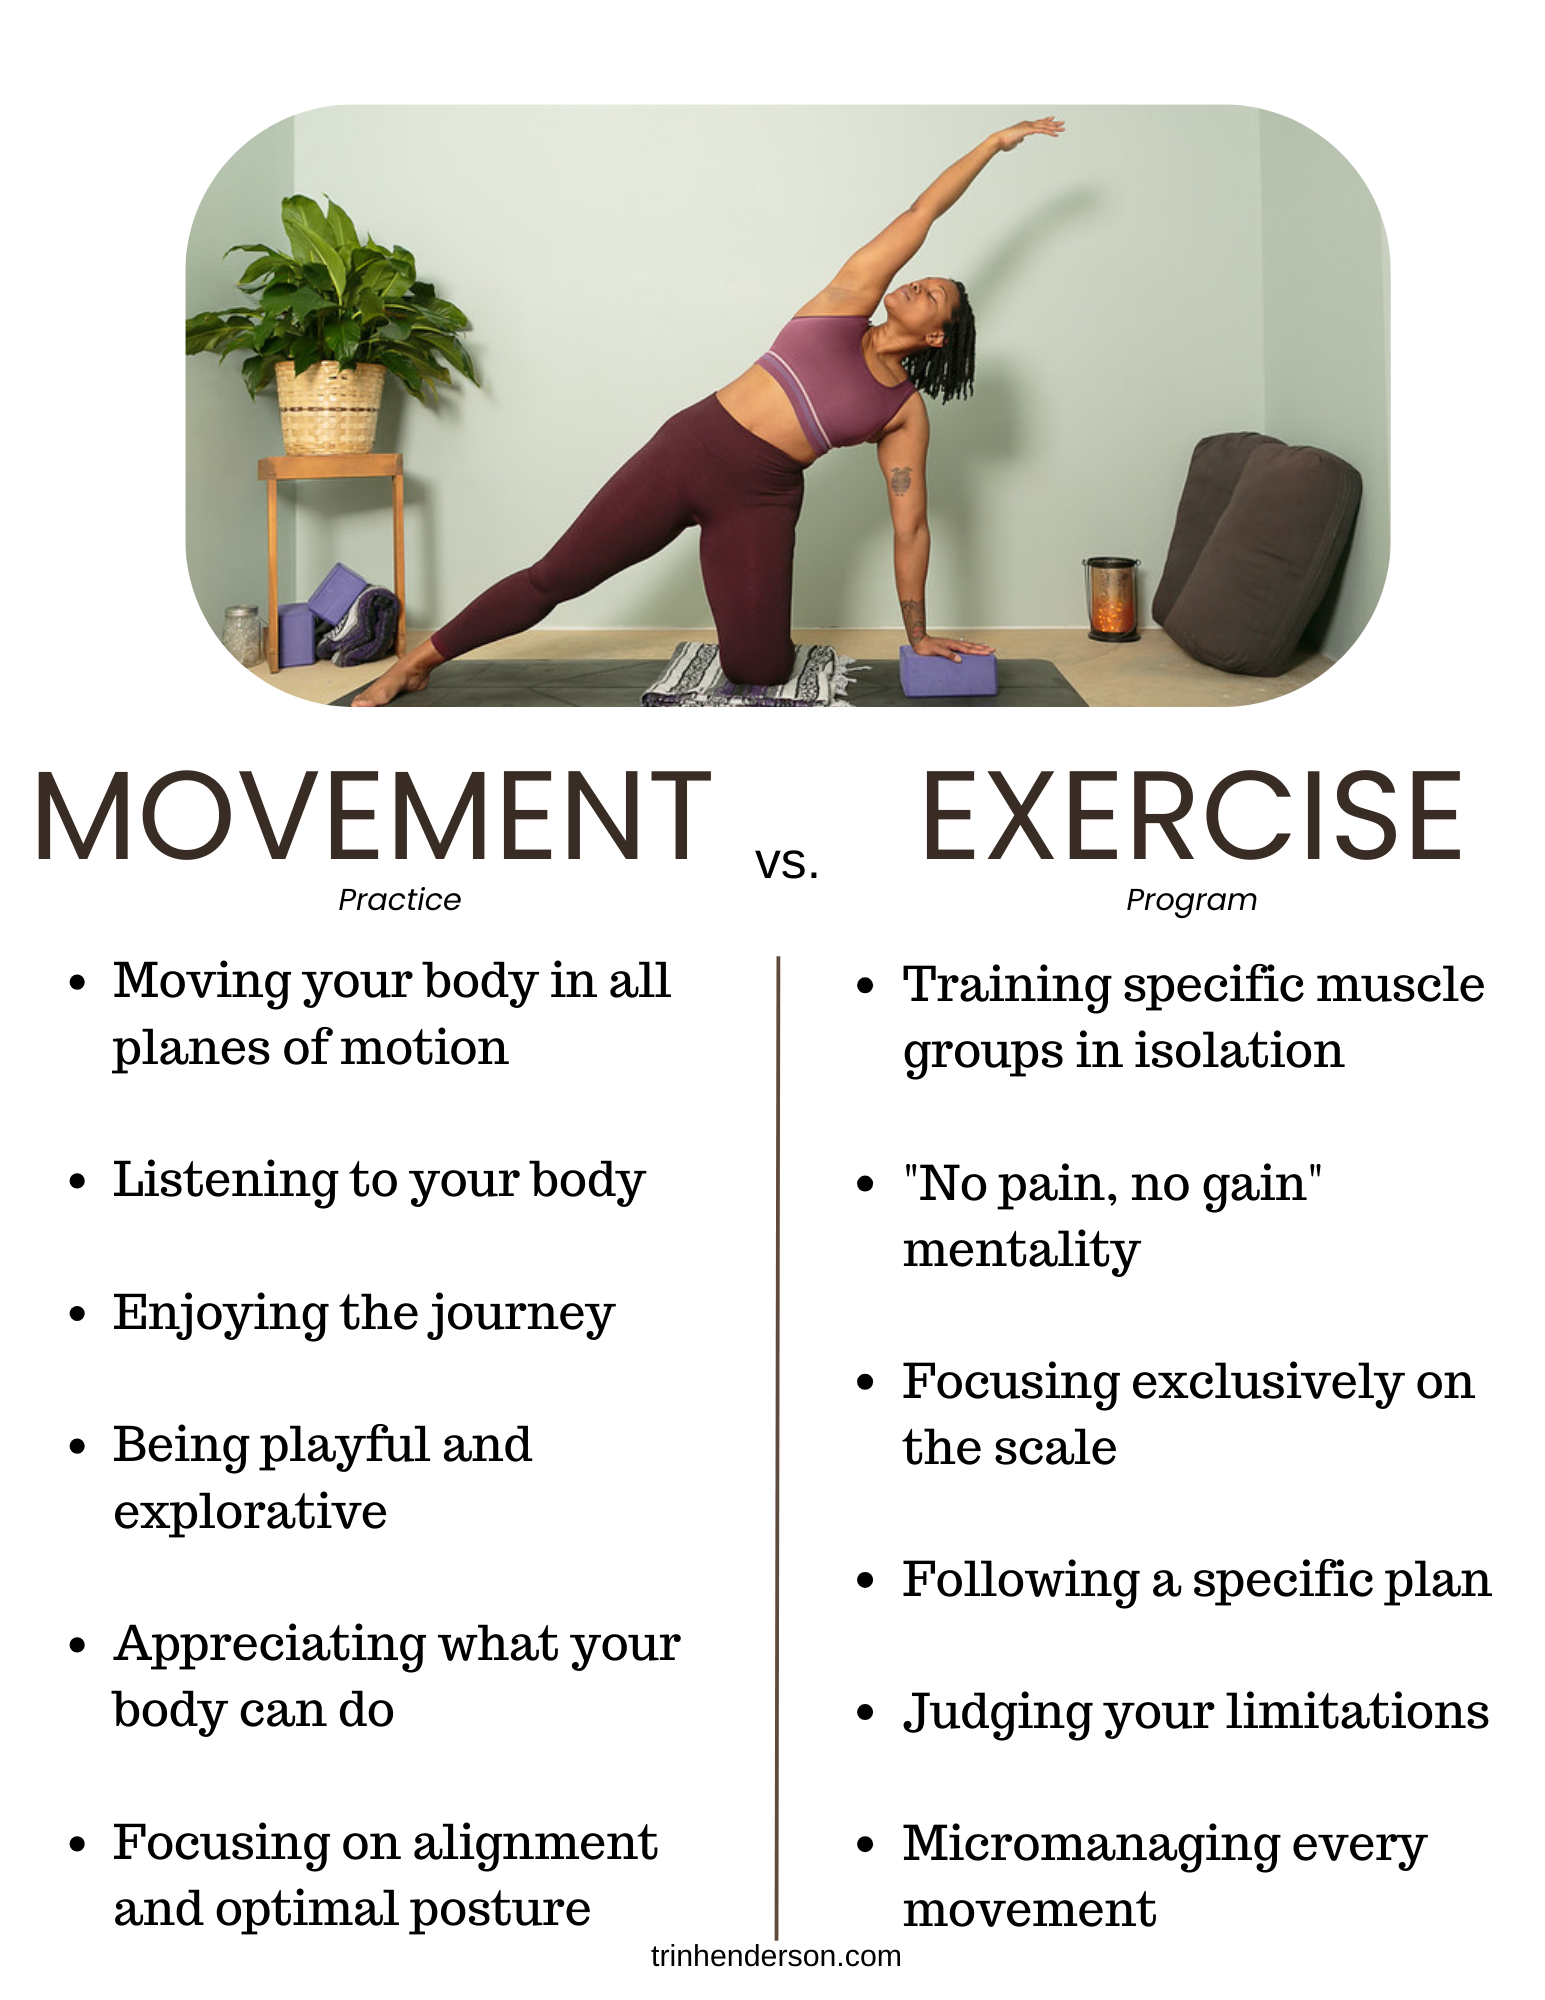 Cultivate your daily movement practice